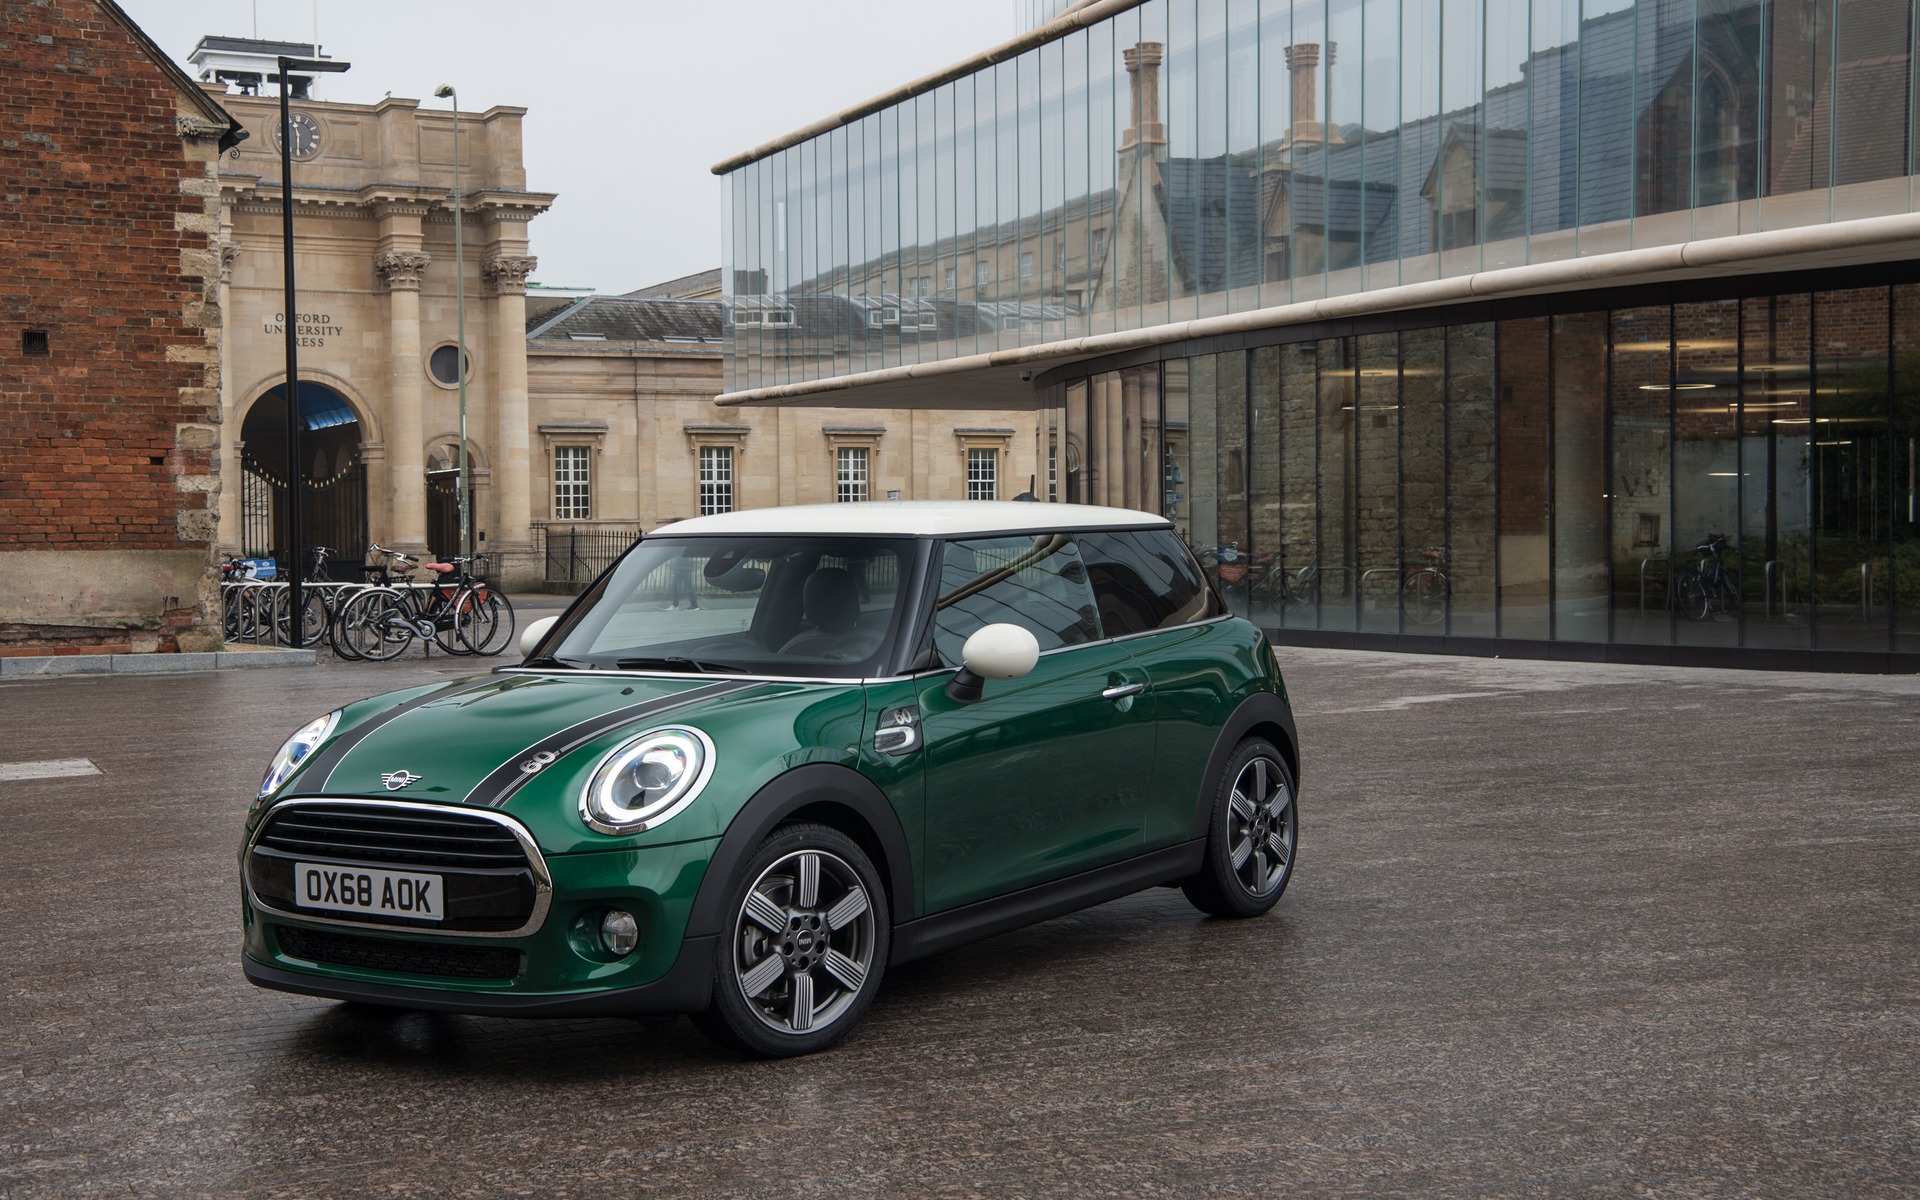 This Classic Mini Countryman Might Just Fit Into a New Mini Countryman –  News – Car and Driver